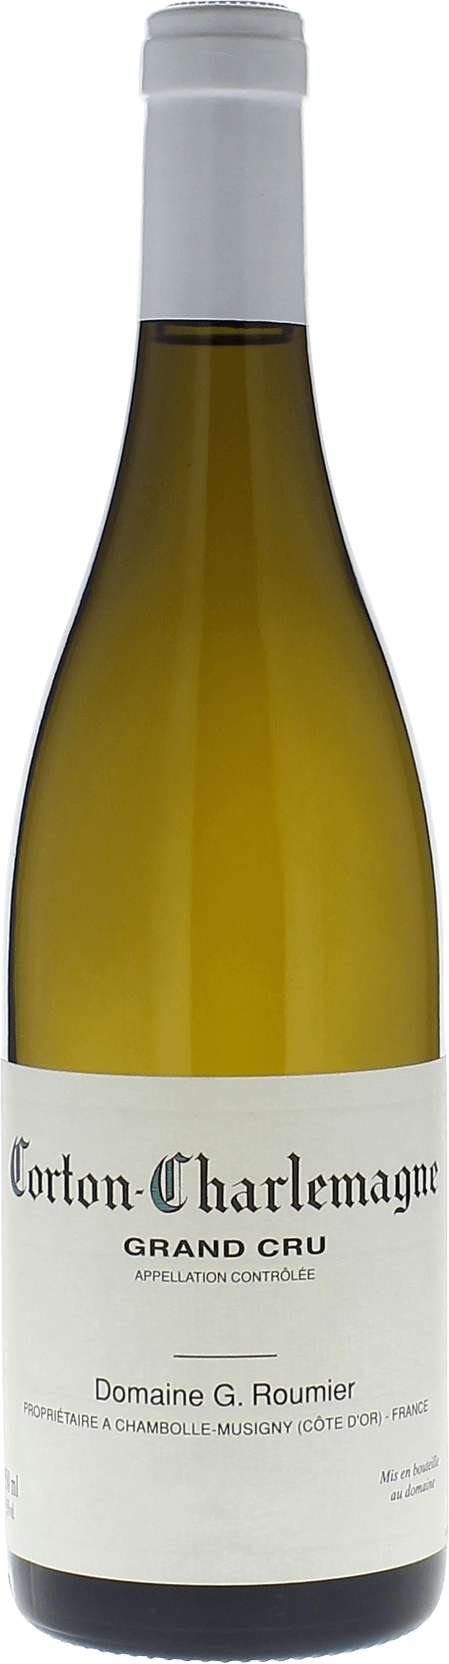 Corton charlemagne grand cru 2015 Domaine ROUMIER Georges, Bourgogne blanc